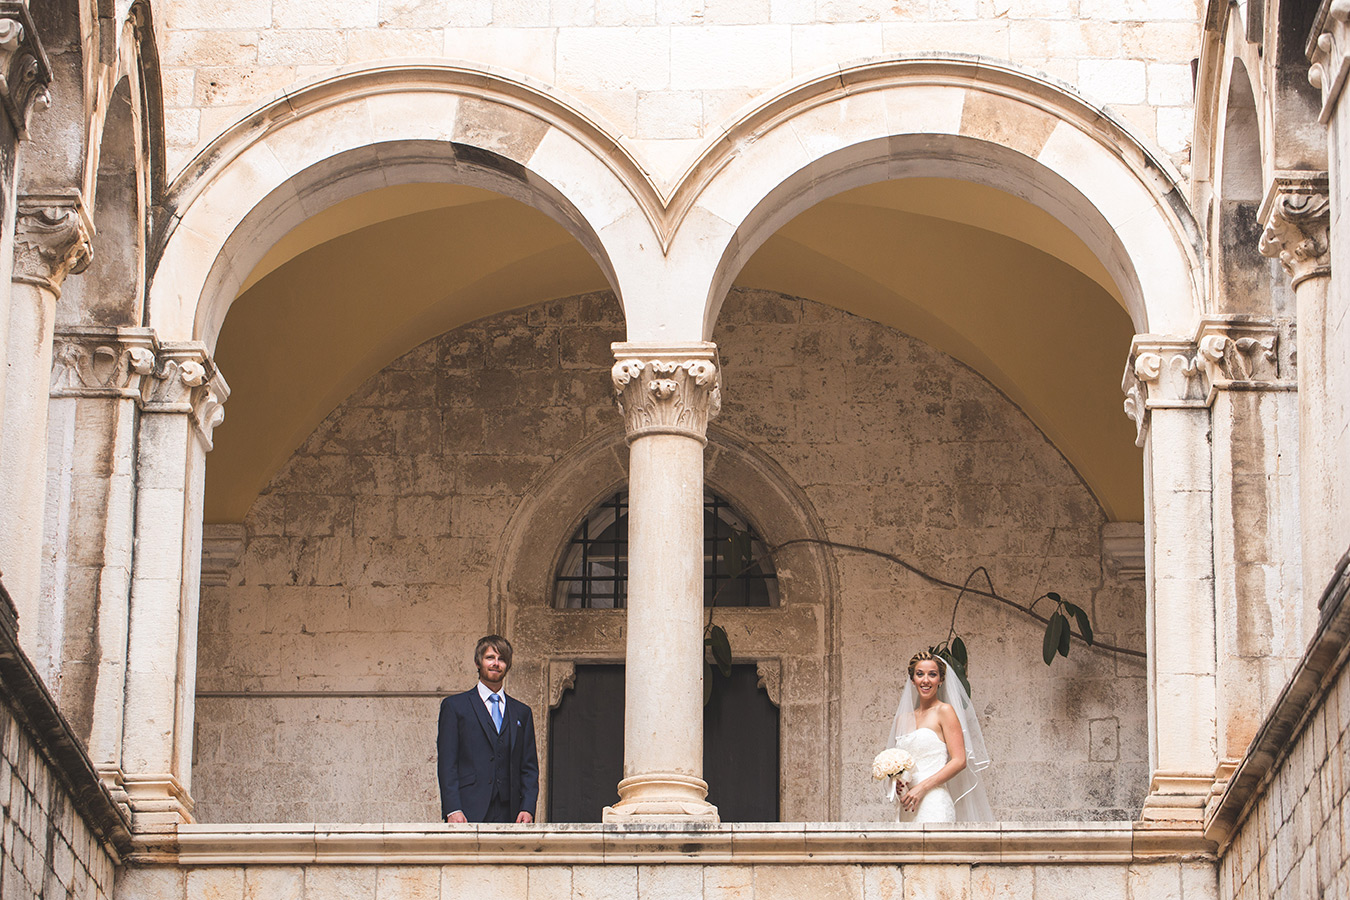 One of a set of images taken at this chic destination Wedding of Jenna & Nick. The stylish old town of Dubrovnik, Croatia.  The Bride and Groom.  Photography by Matt Porteous